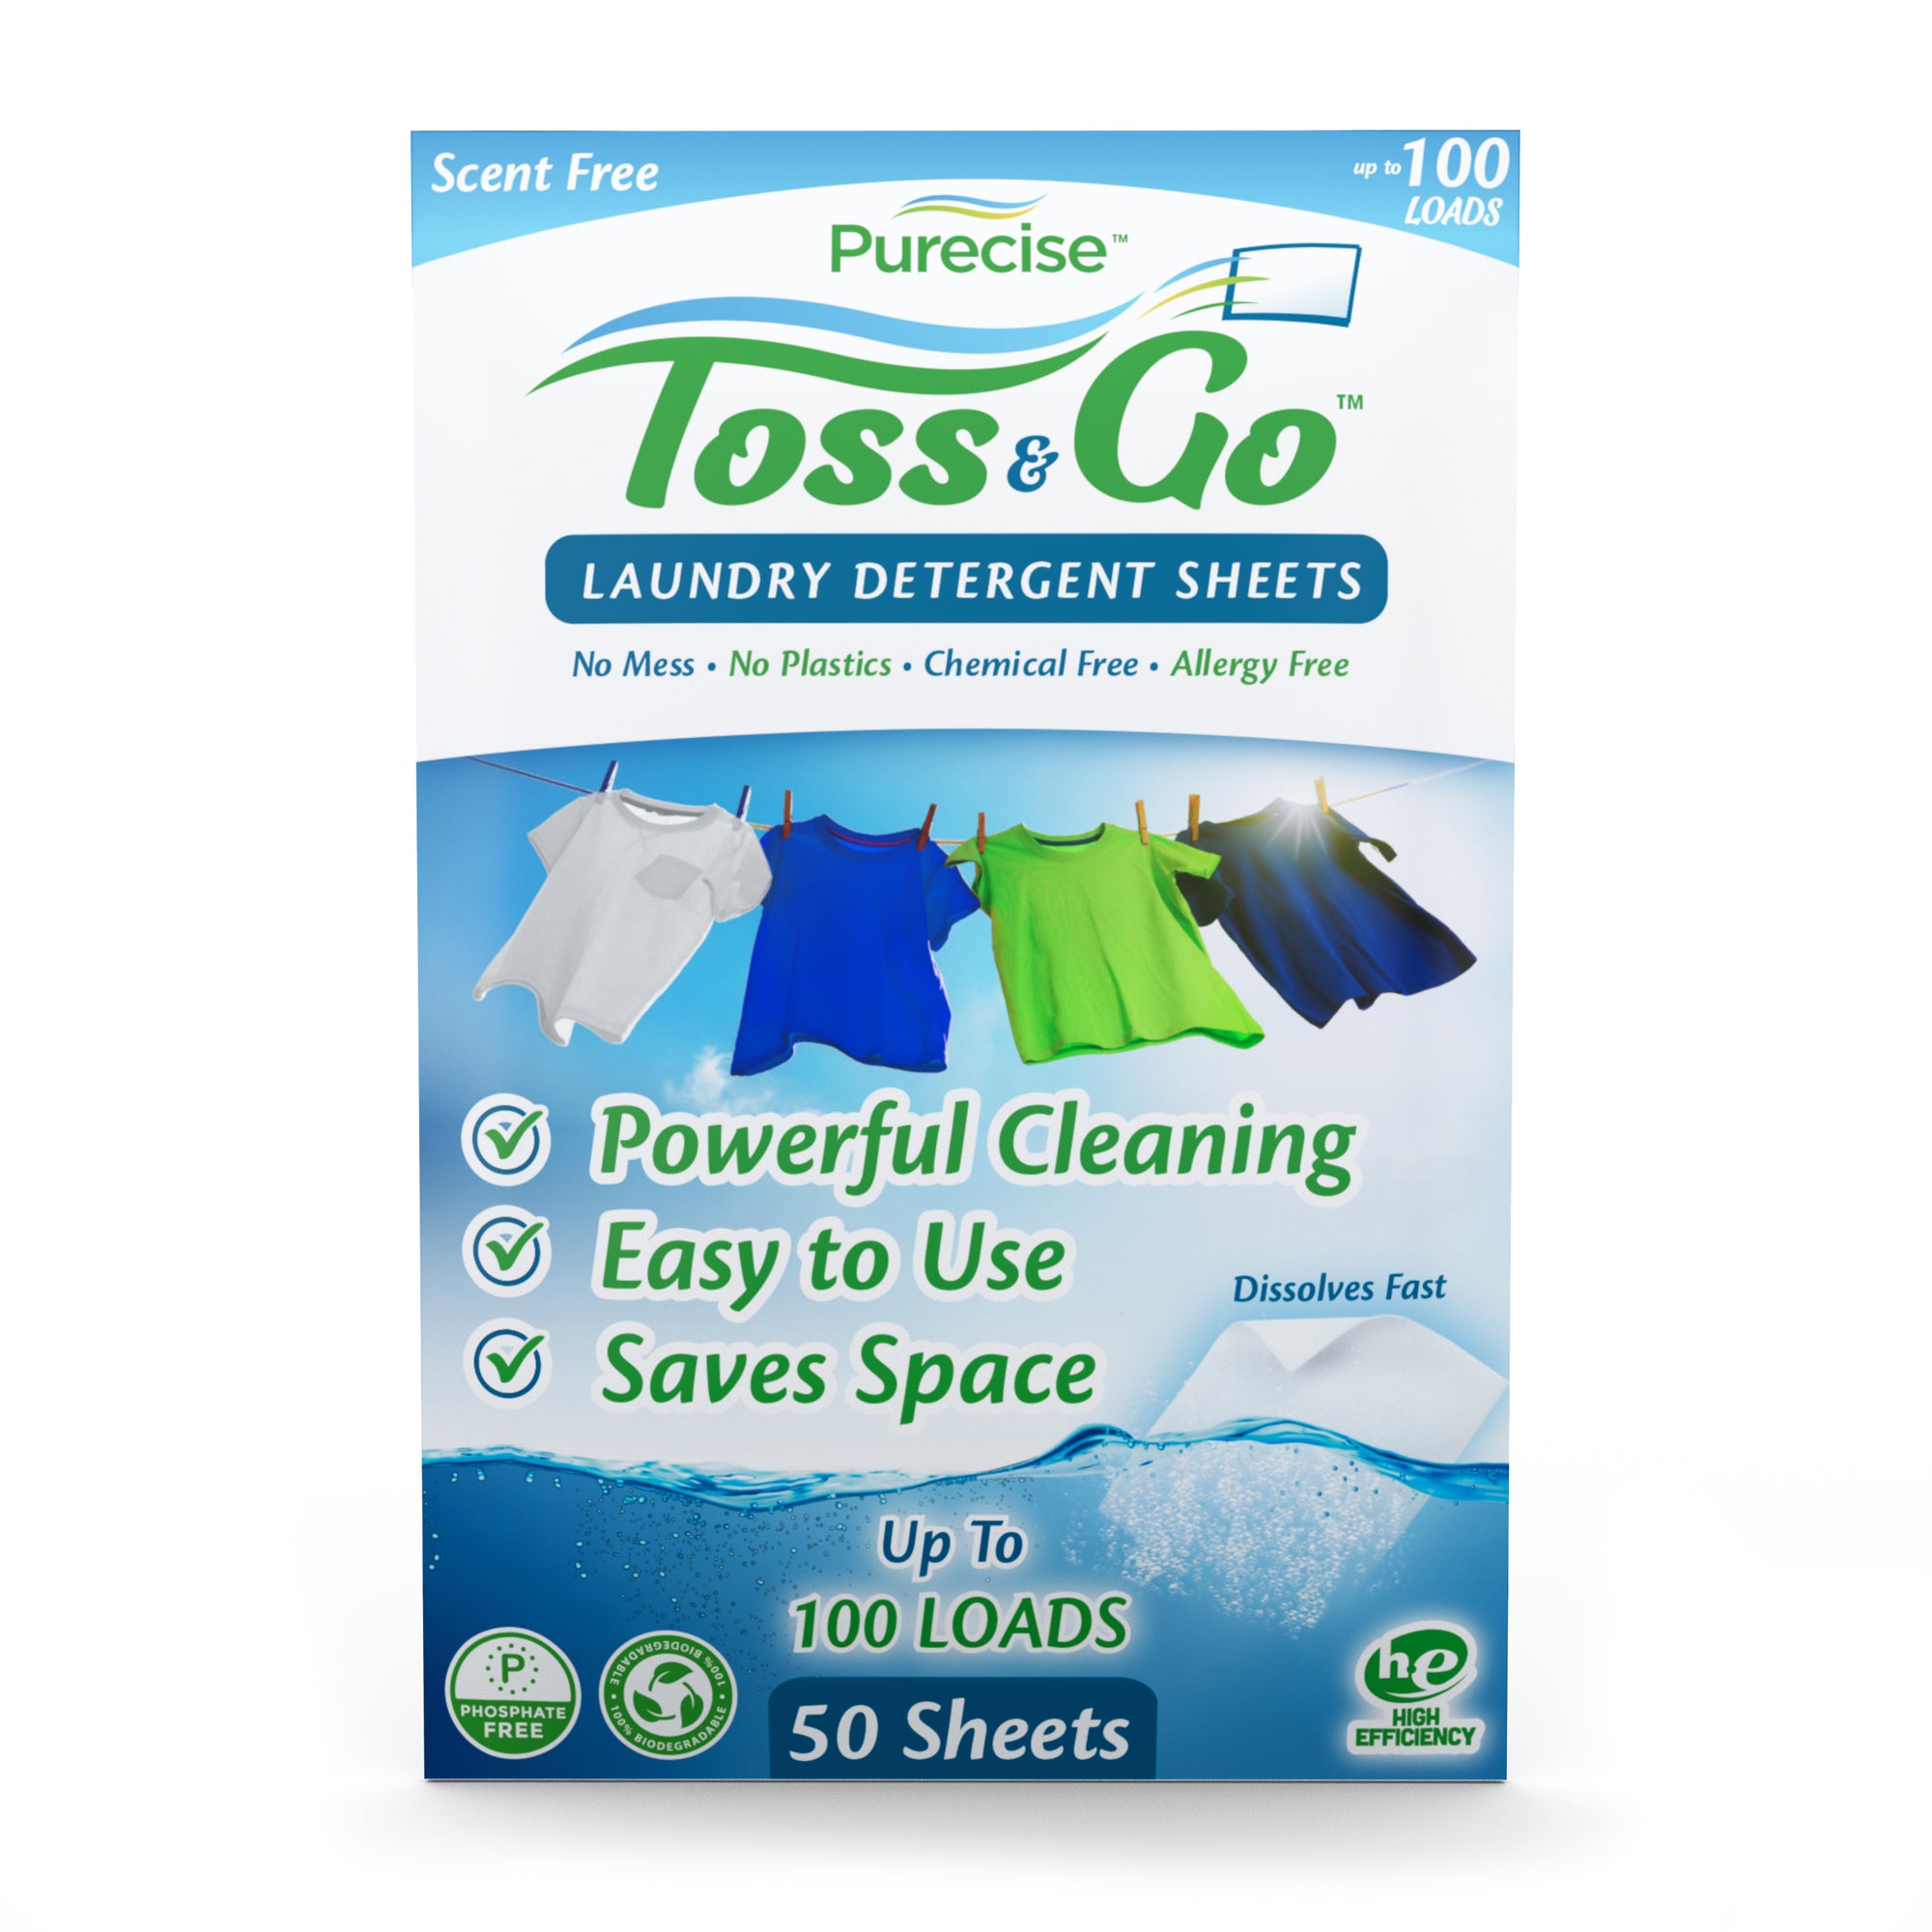 Toss & Go Laundry Detergent Sheets Travel Packs by Purecise